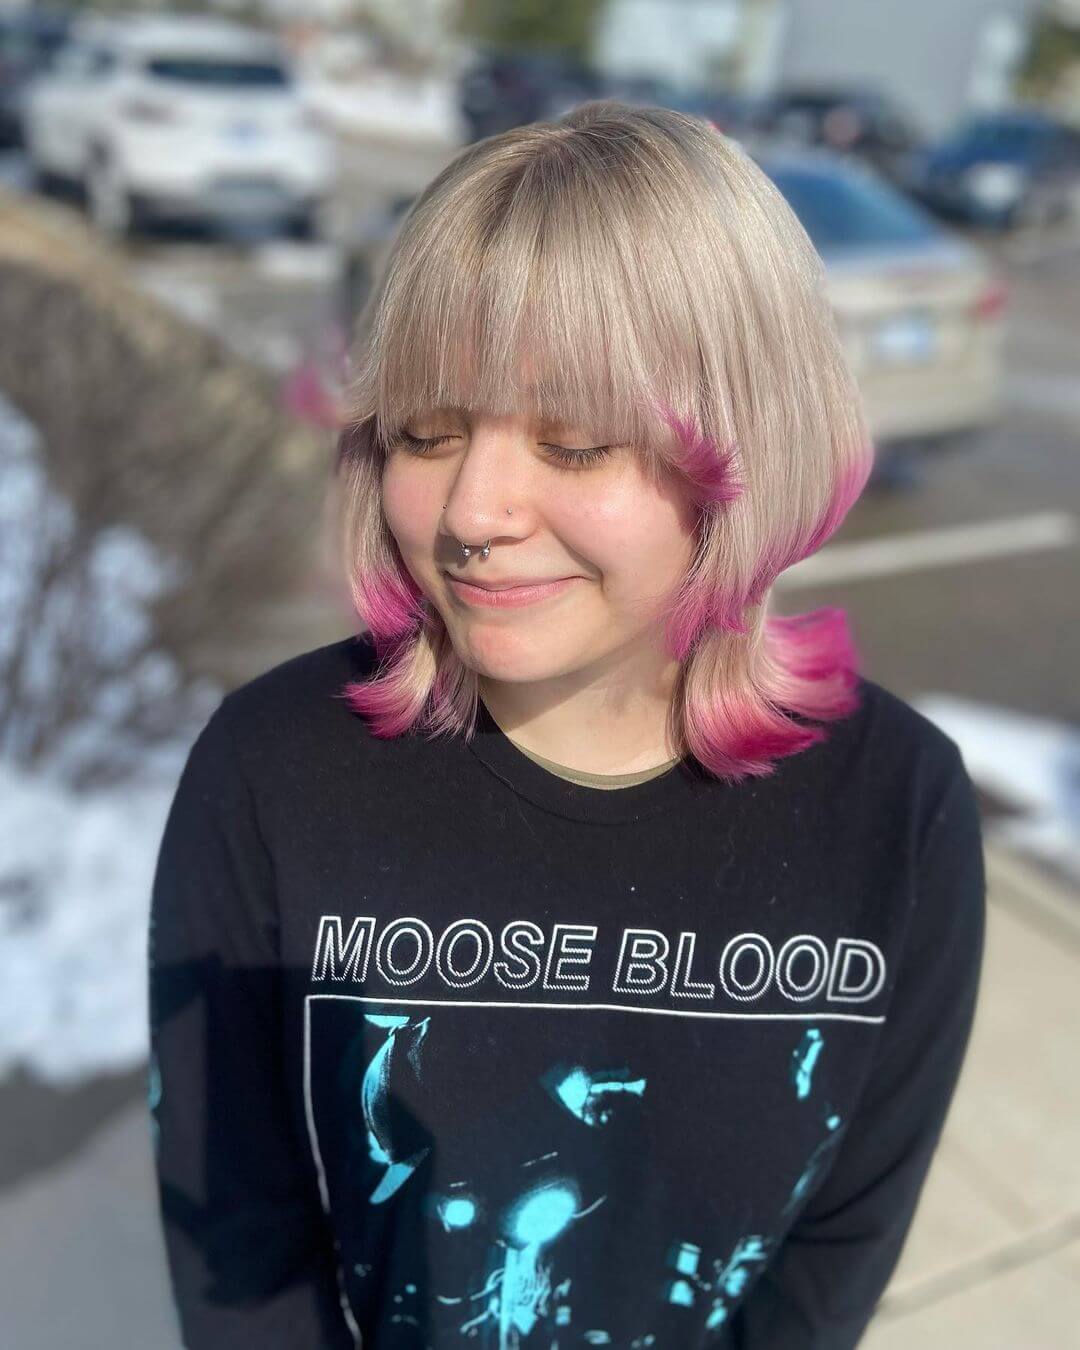 Icy blonde jellyfish haircut with playful pink tips, a soft straight-across fringe, and a sleek bob style.